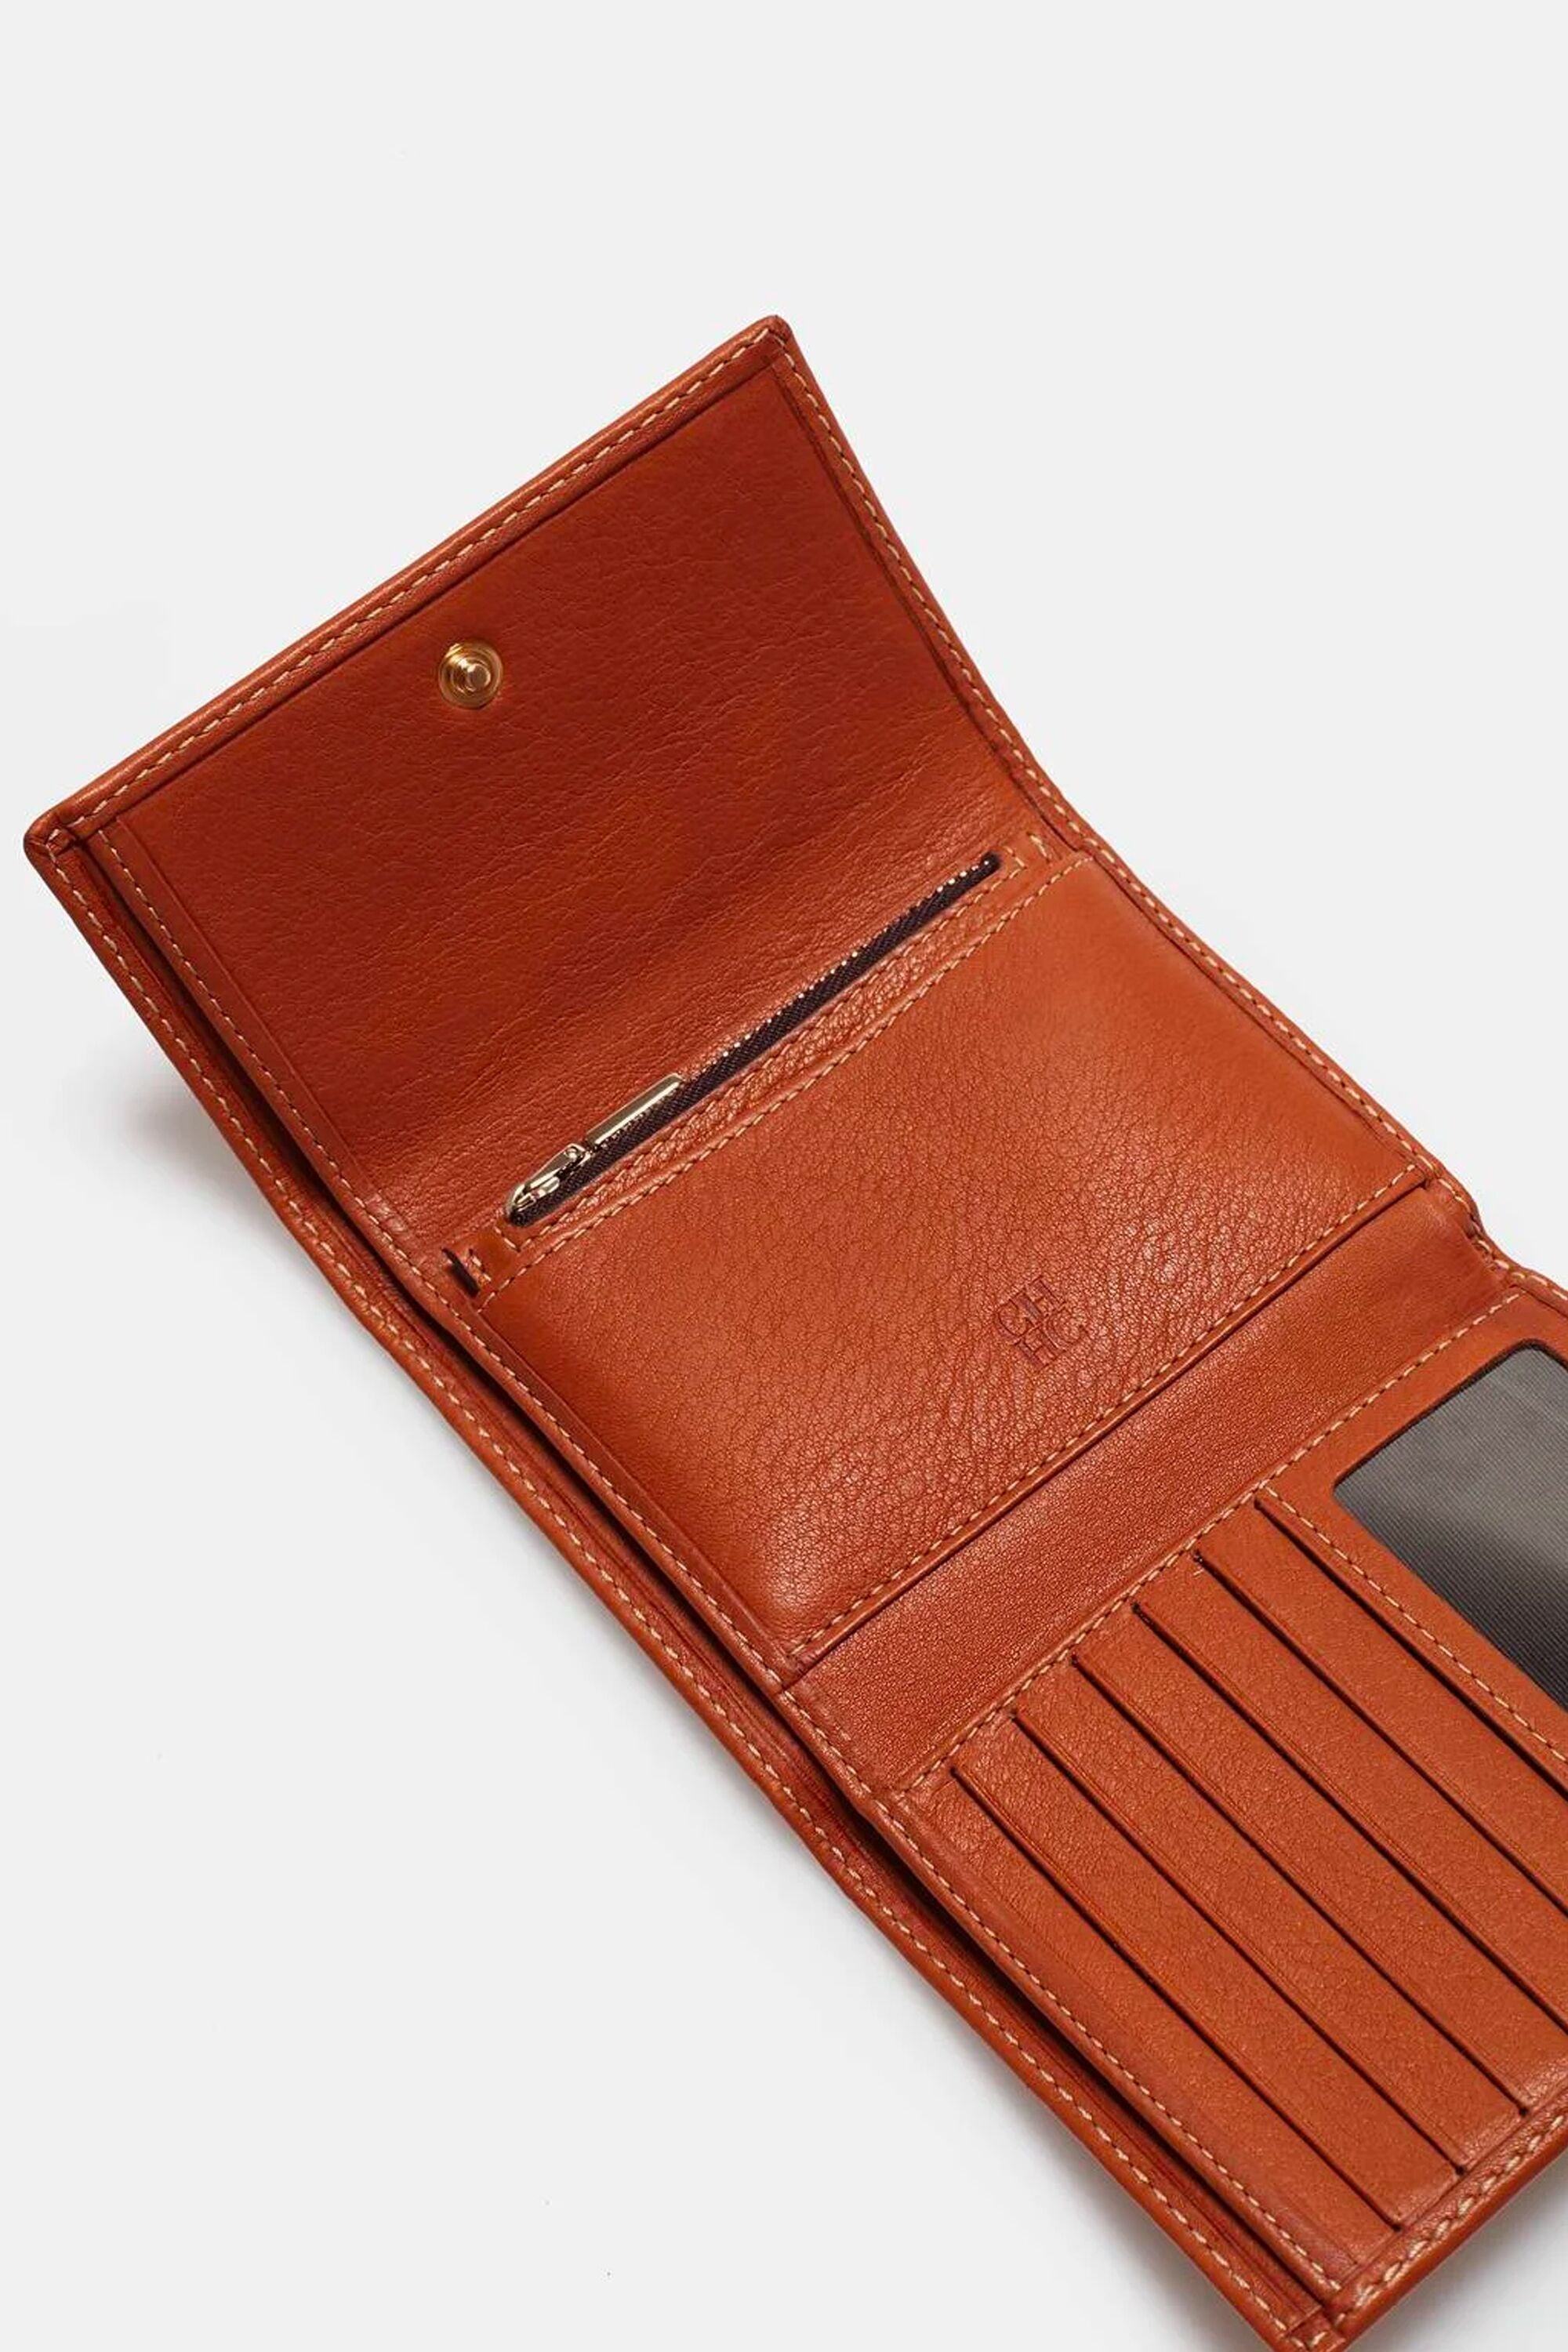 Beautiful Hnadmade Leather Coin Purse with Card Slots by Vida Vida – Vida  Vida Leather Bags & Accessories